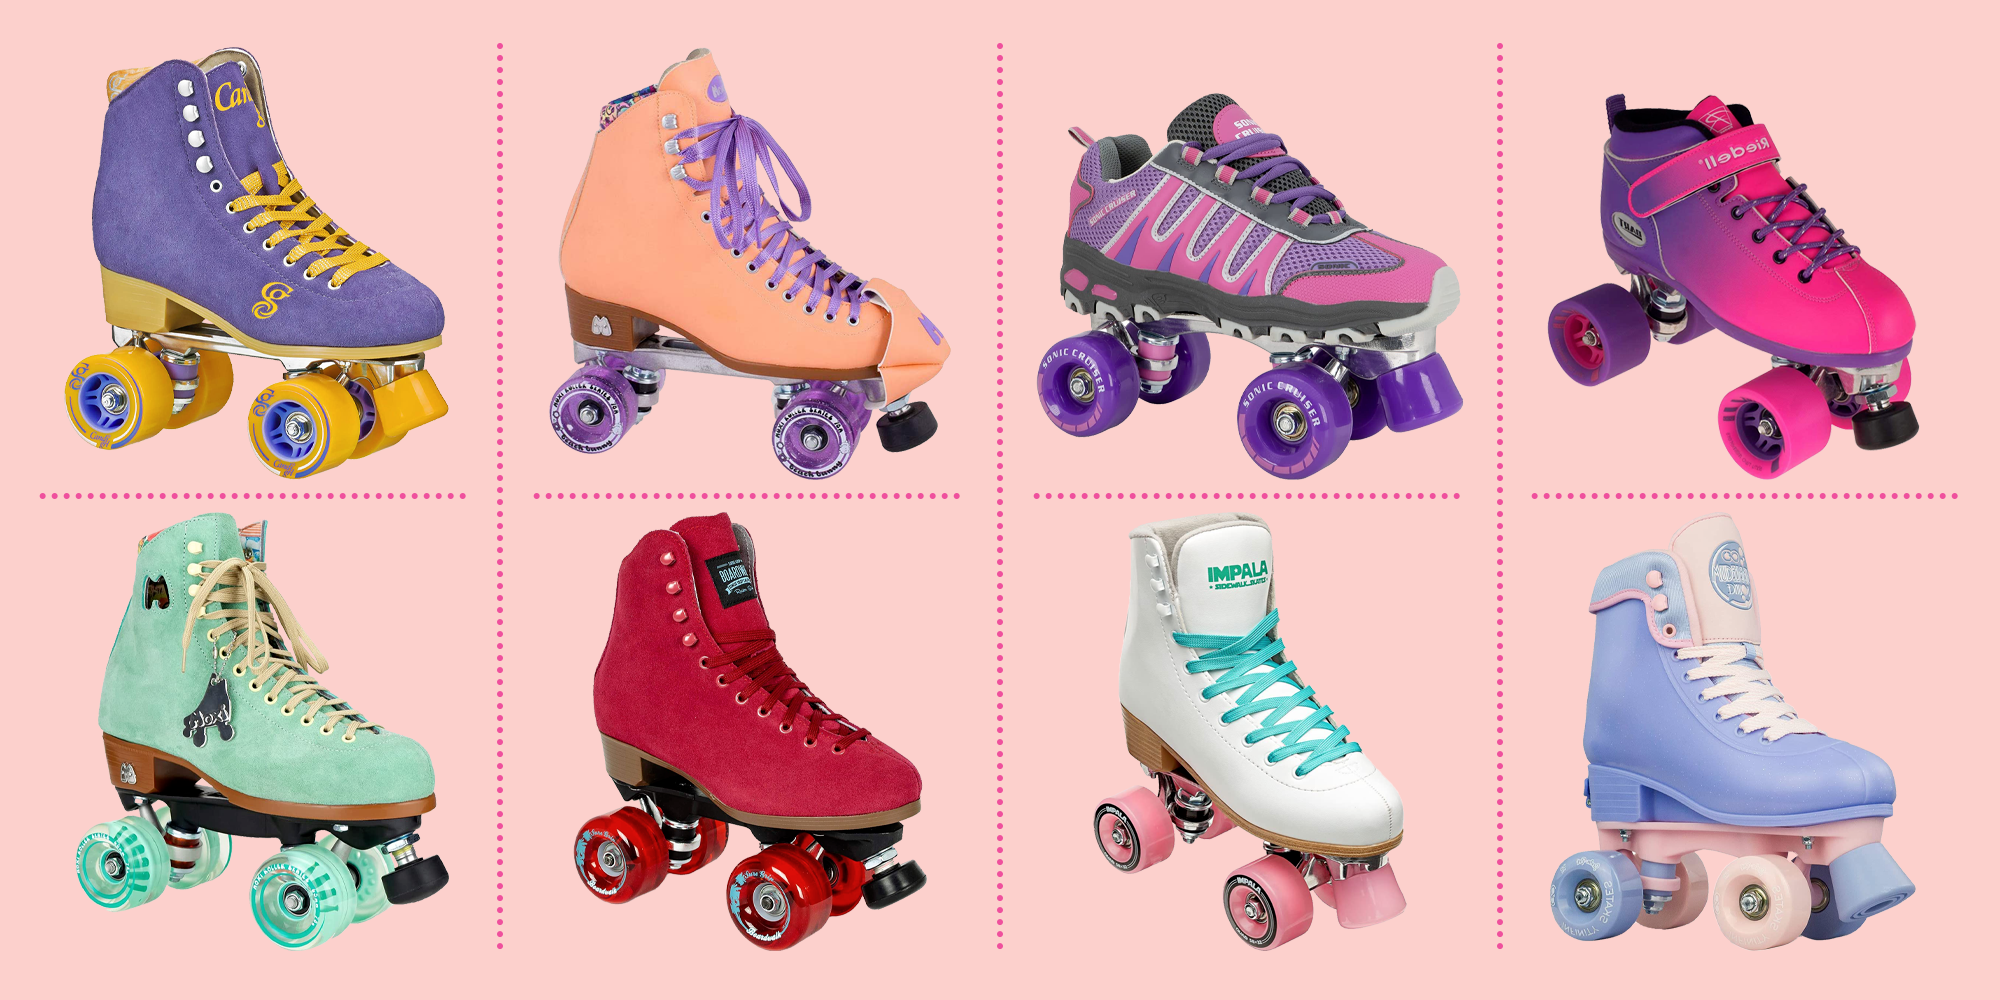 Stmax Quad Roller Skates for Girls and Women Size 2.5 Kids to 8.5 Women Outdoor Indoor Rink Skating Classic High Cuff Adjustable Lace System 